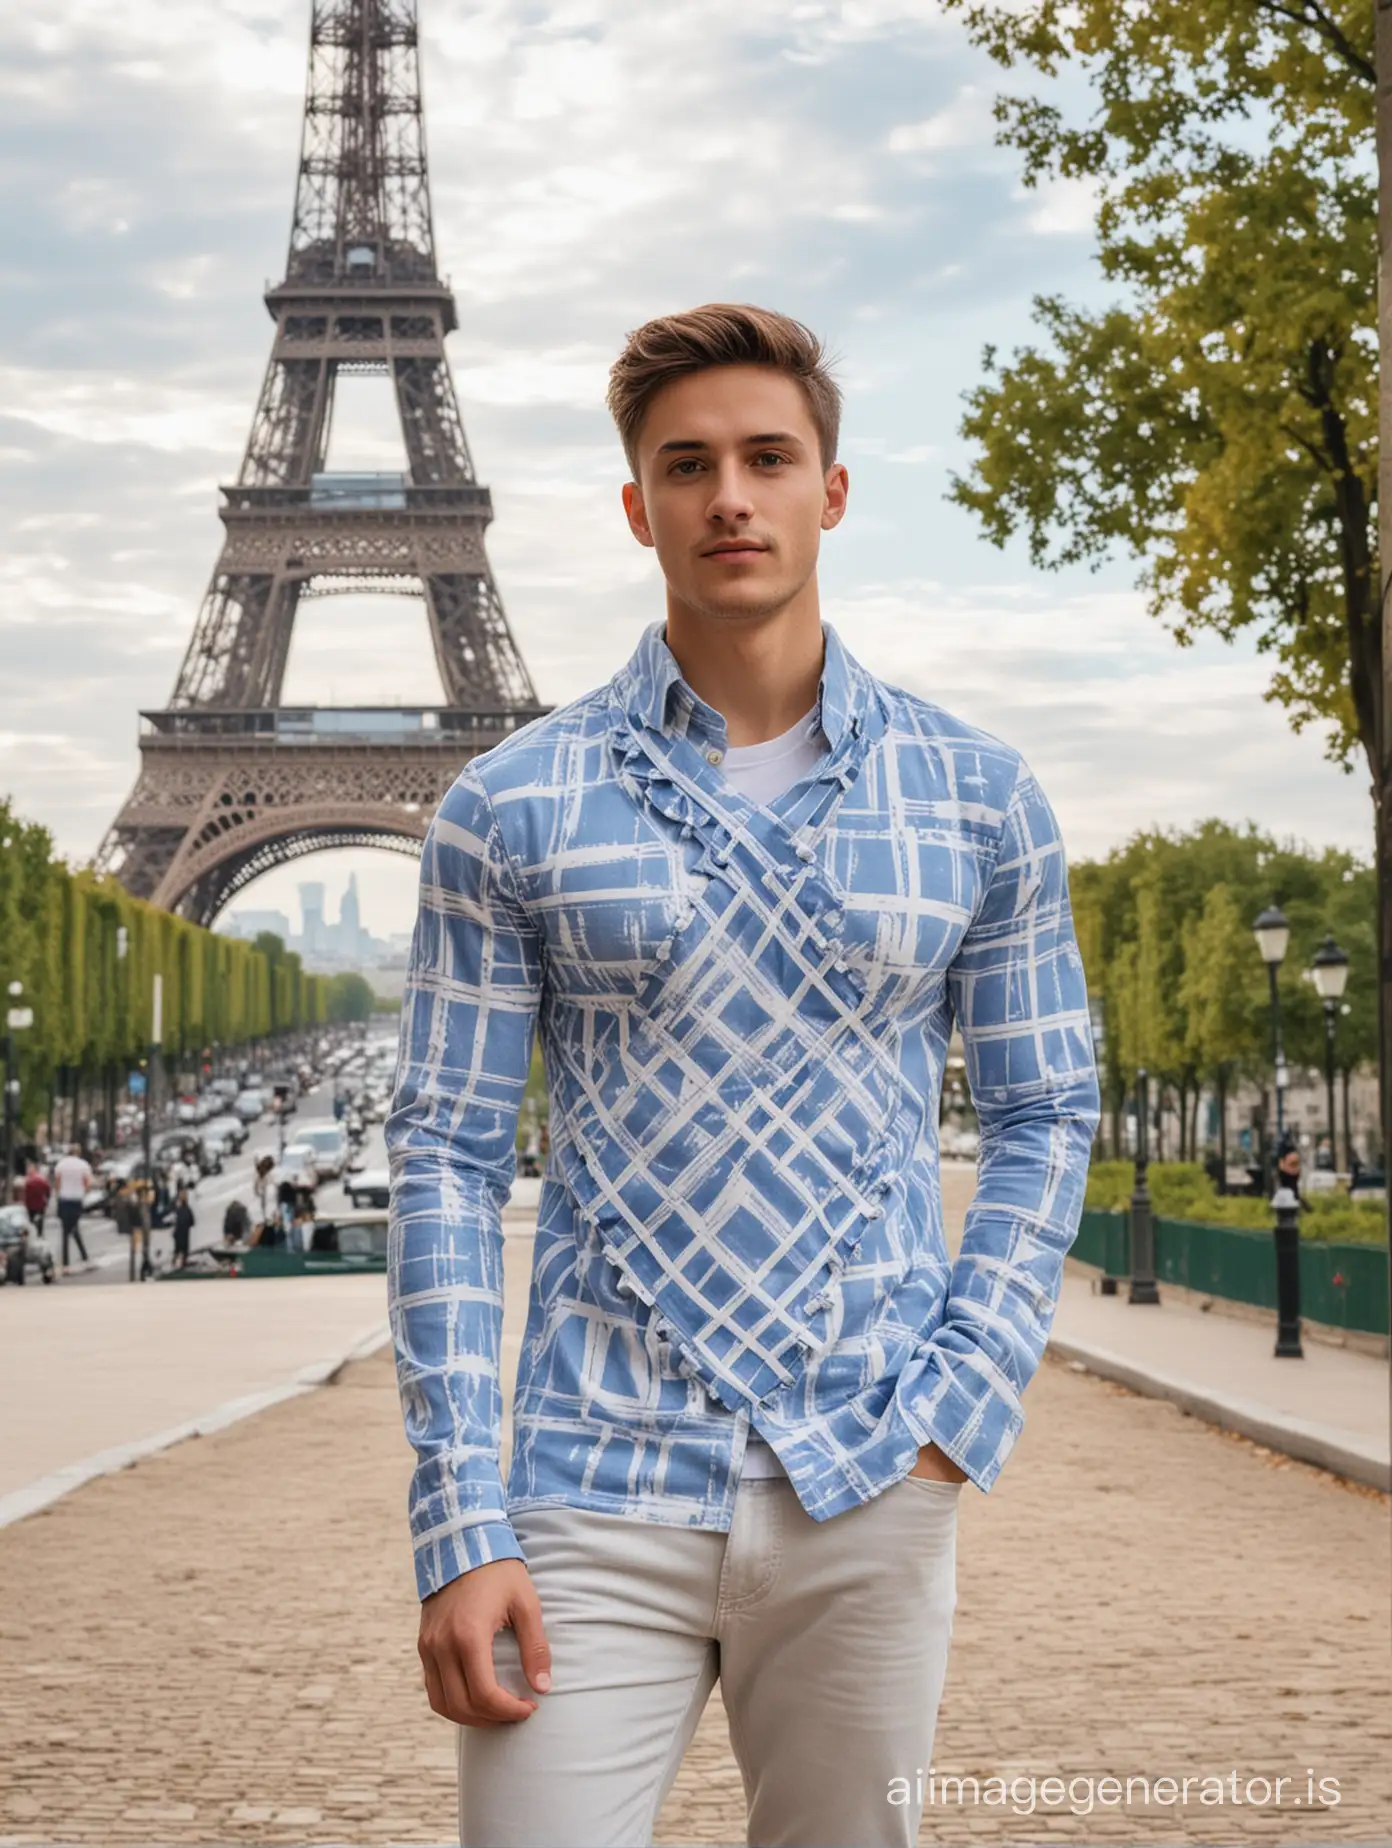 A young man wearing long sleeve criss cross blue and white colour, standing with background of beautiful eifel tower